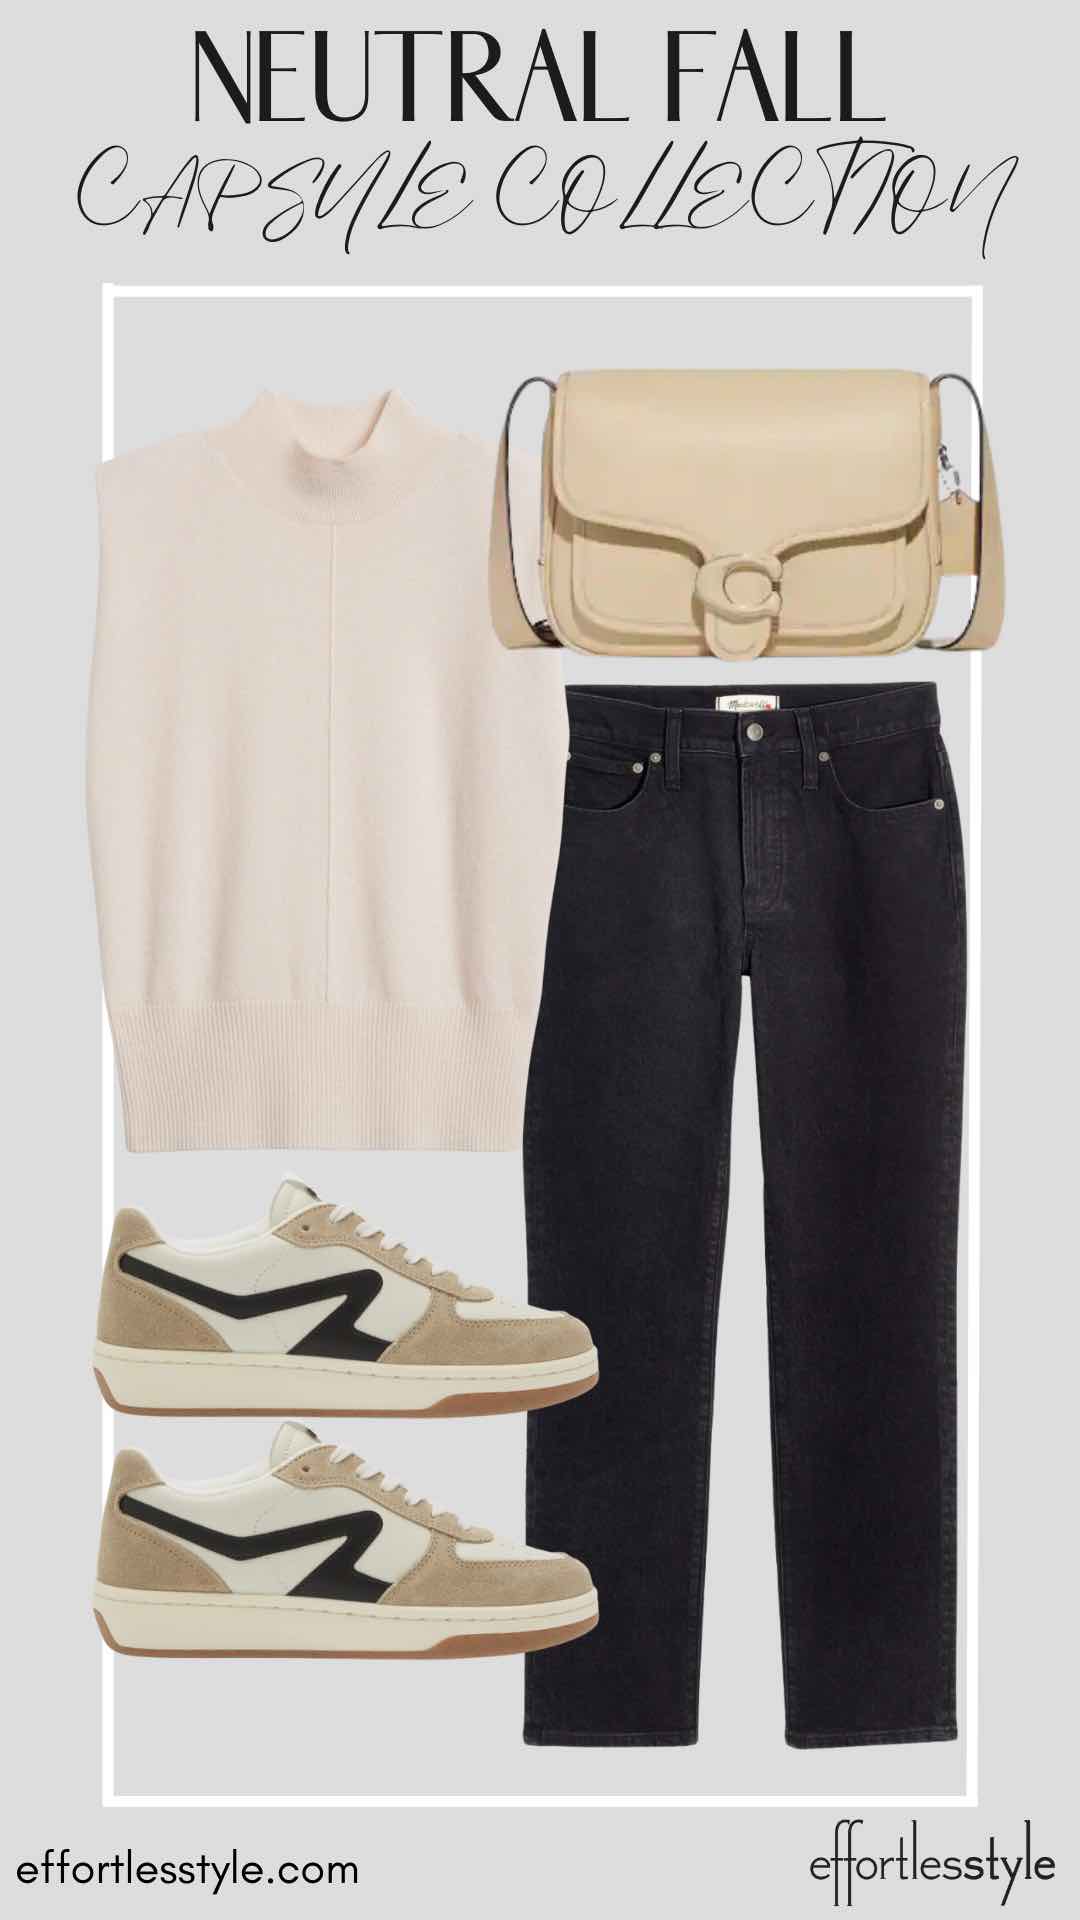 How To Wear Our Neutral Fall Capsule Wardrobe - Part 1 Sweater Tank & Black Jeans travel day style inspiration casual fall looks how to wear sneakers with a dressy top how to look cute when traveling what to wear on the airplane this fall what to wear on fall break what to pack for a trip this fall